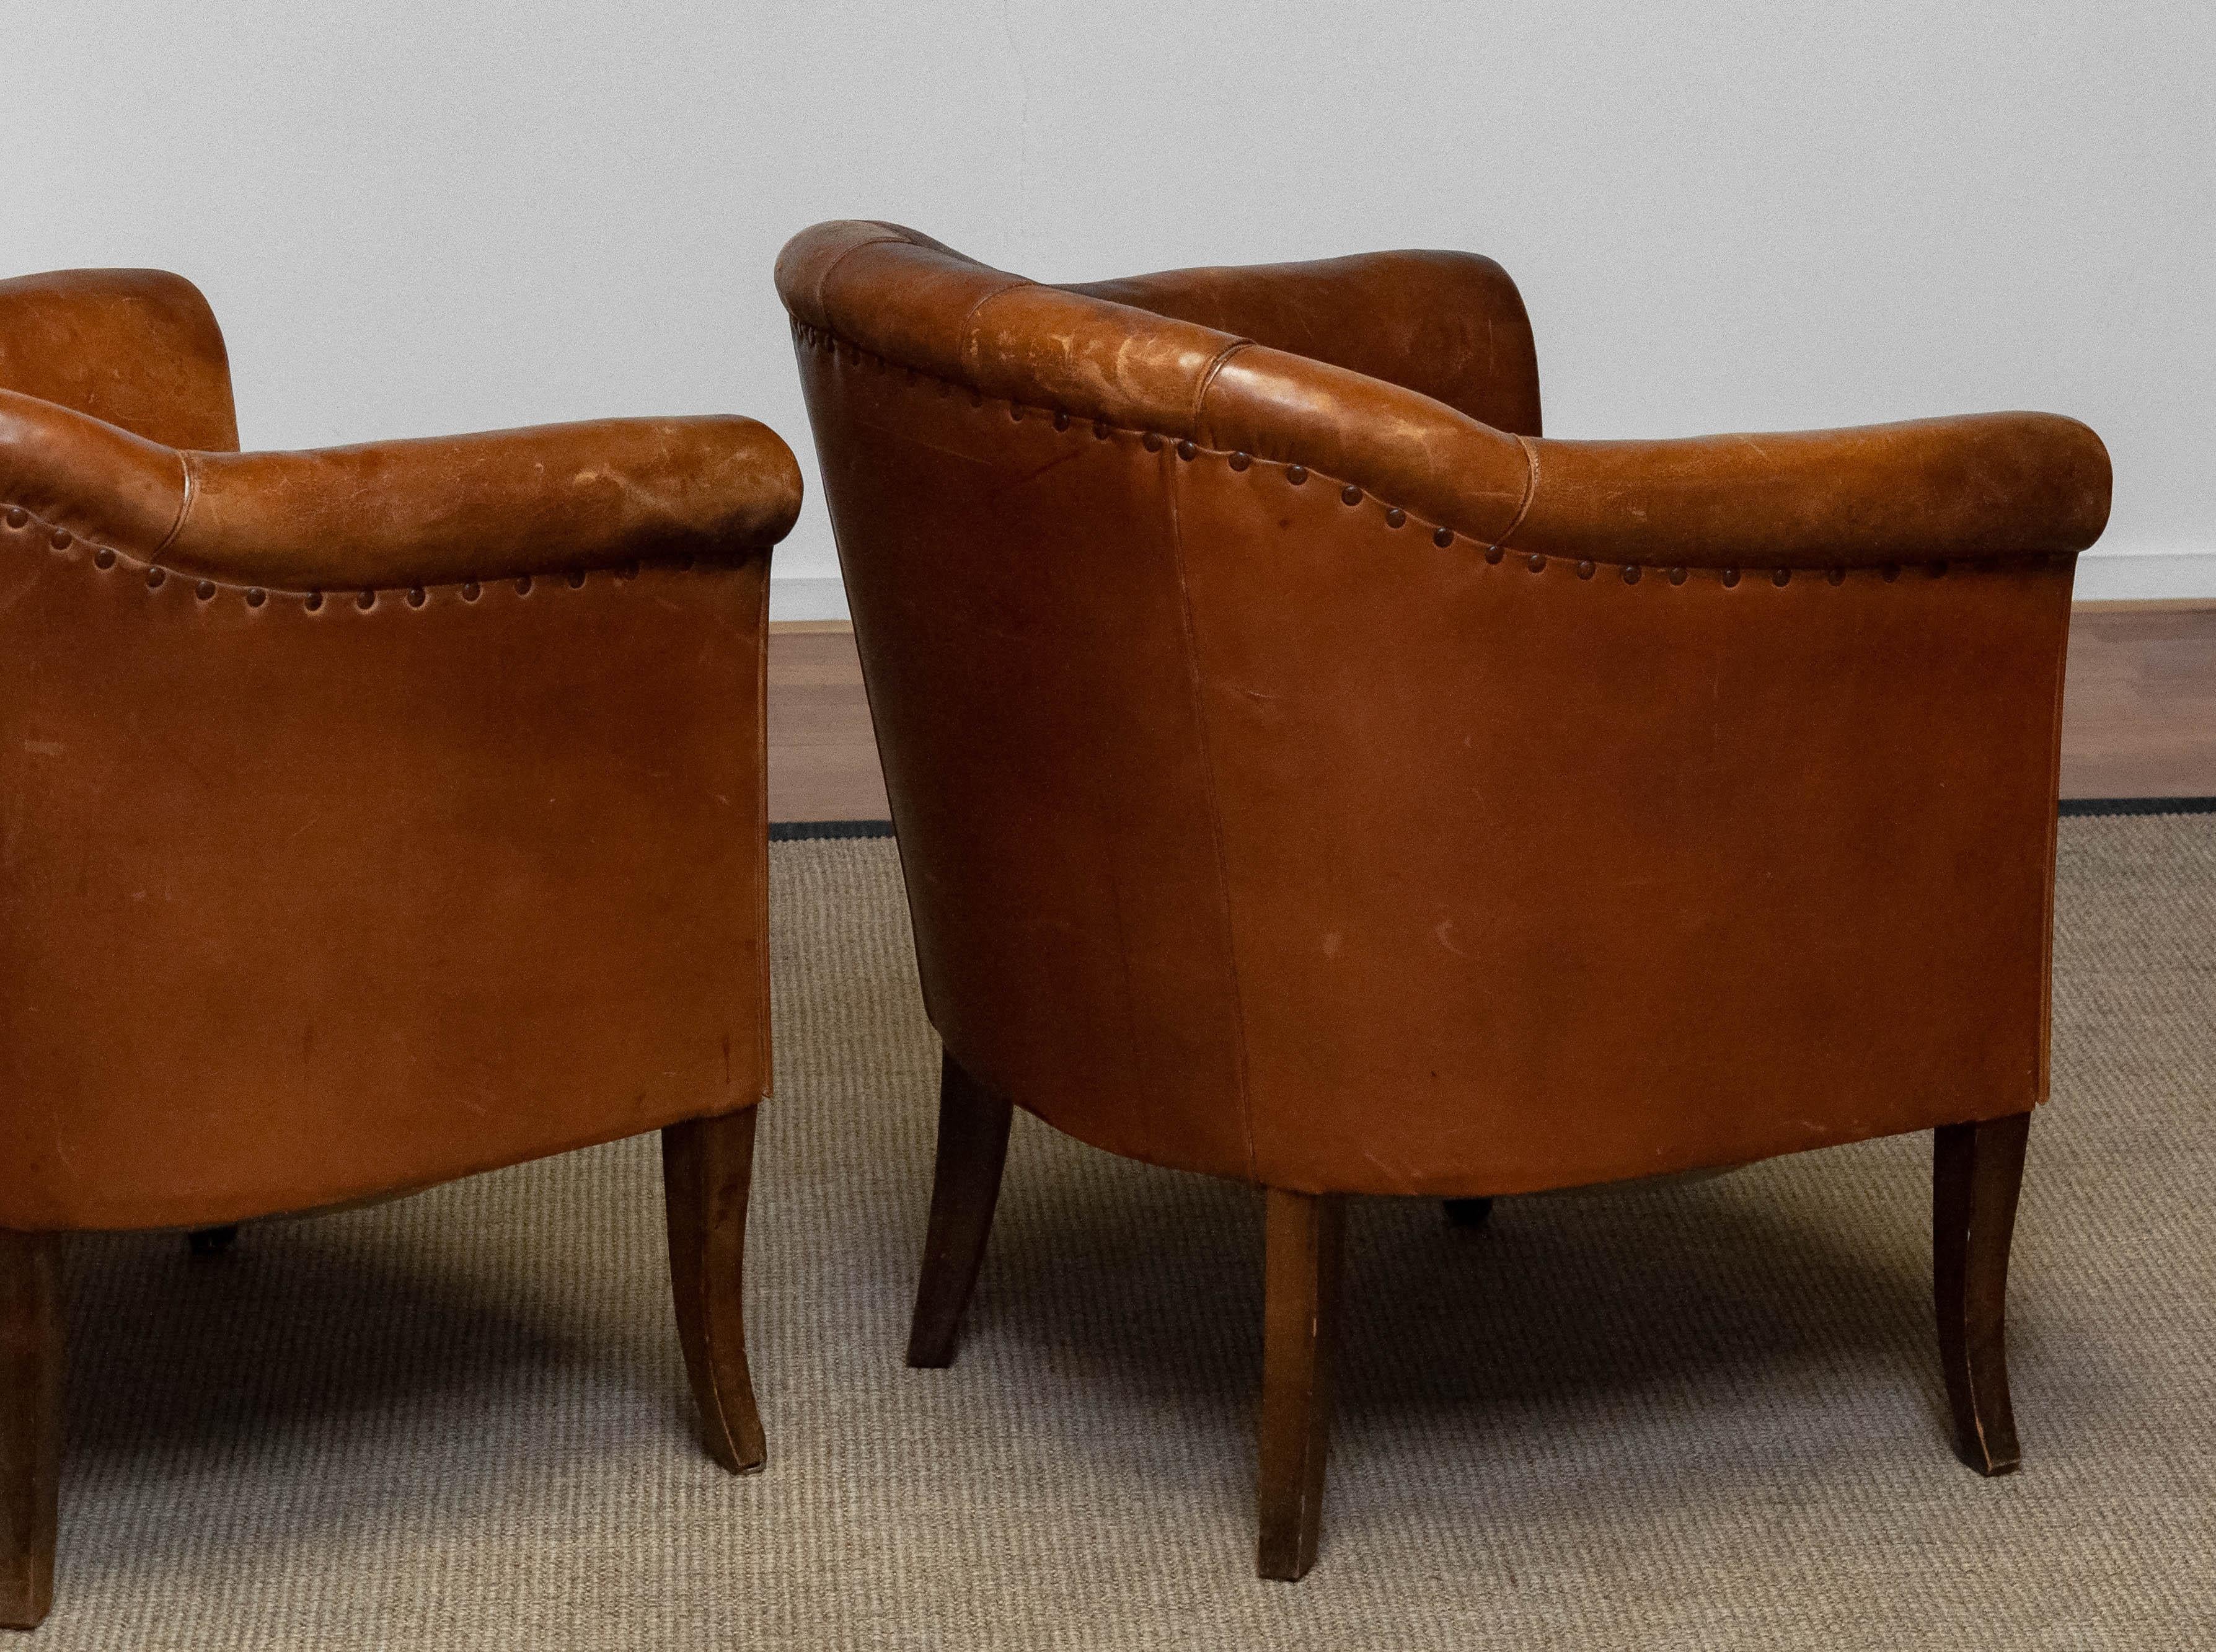 Pair Late 19th Century Swedish Tan / Brown Nailed Leather Lounge / Club Chairs 8